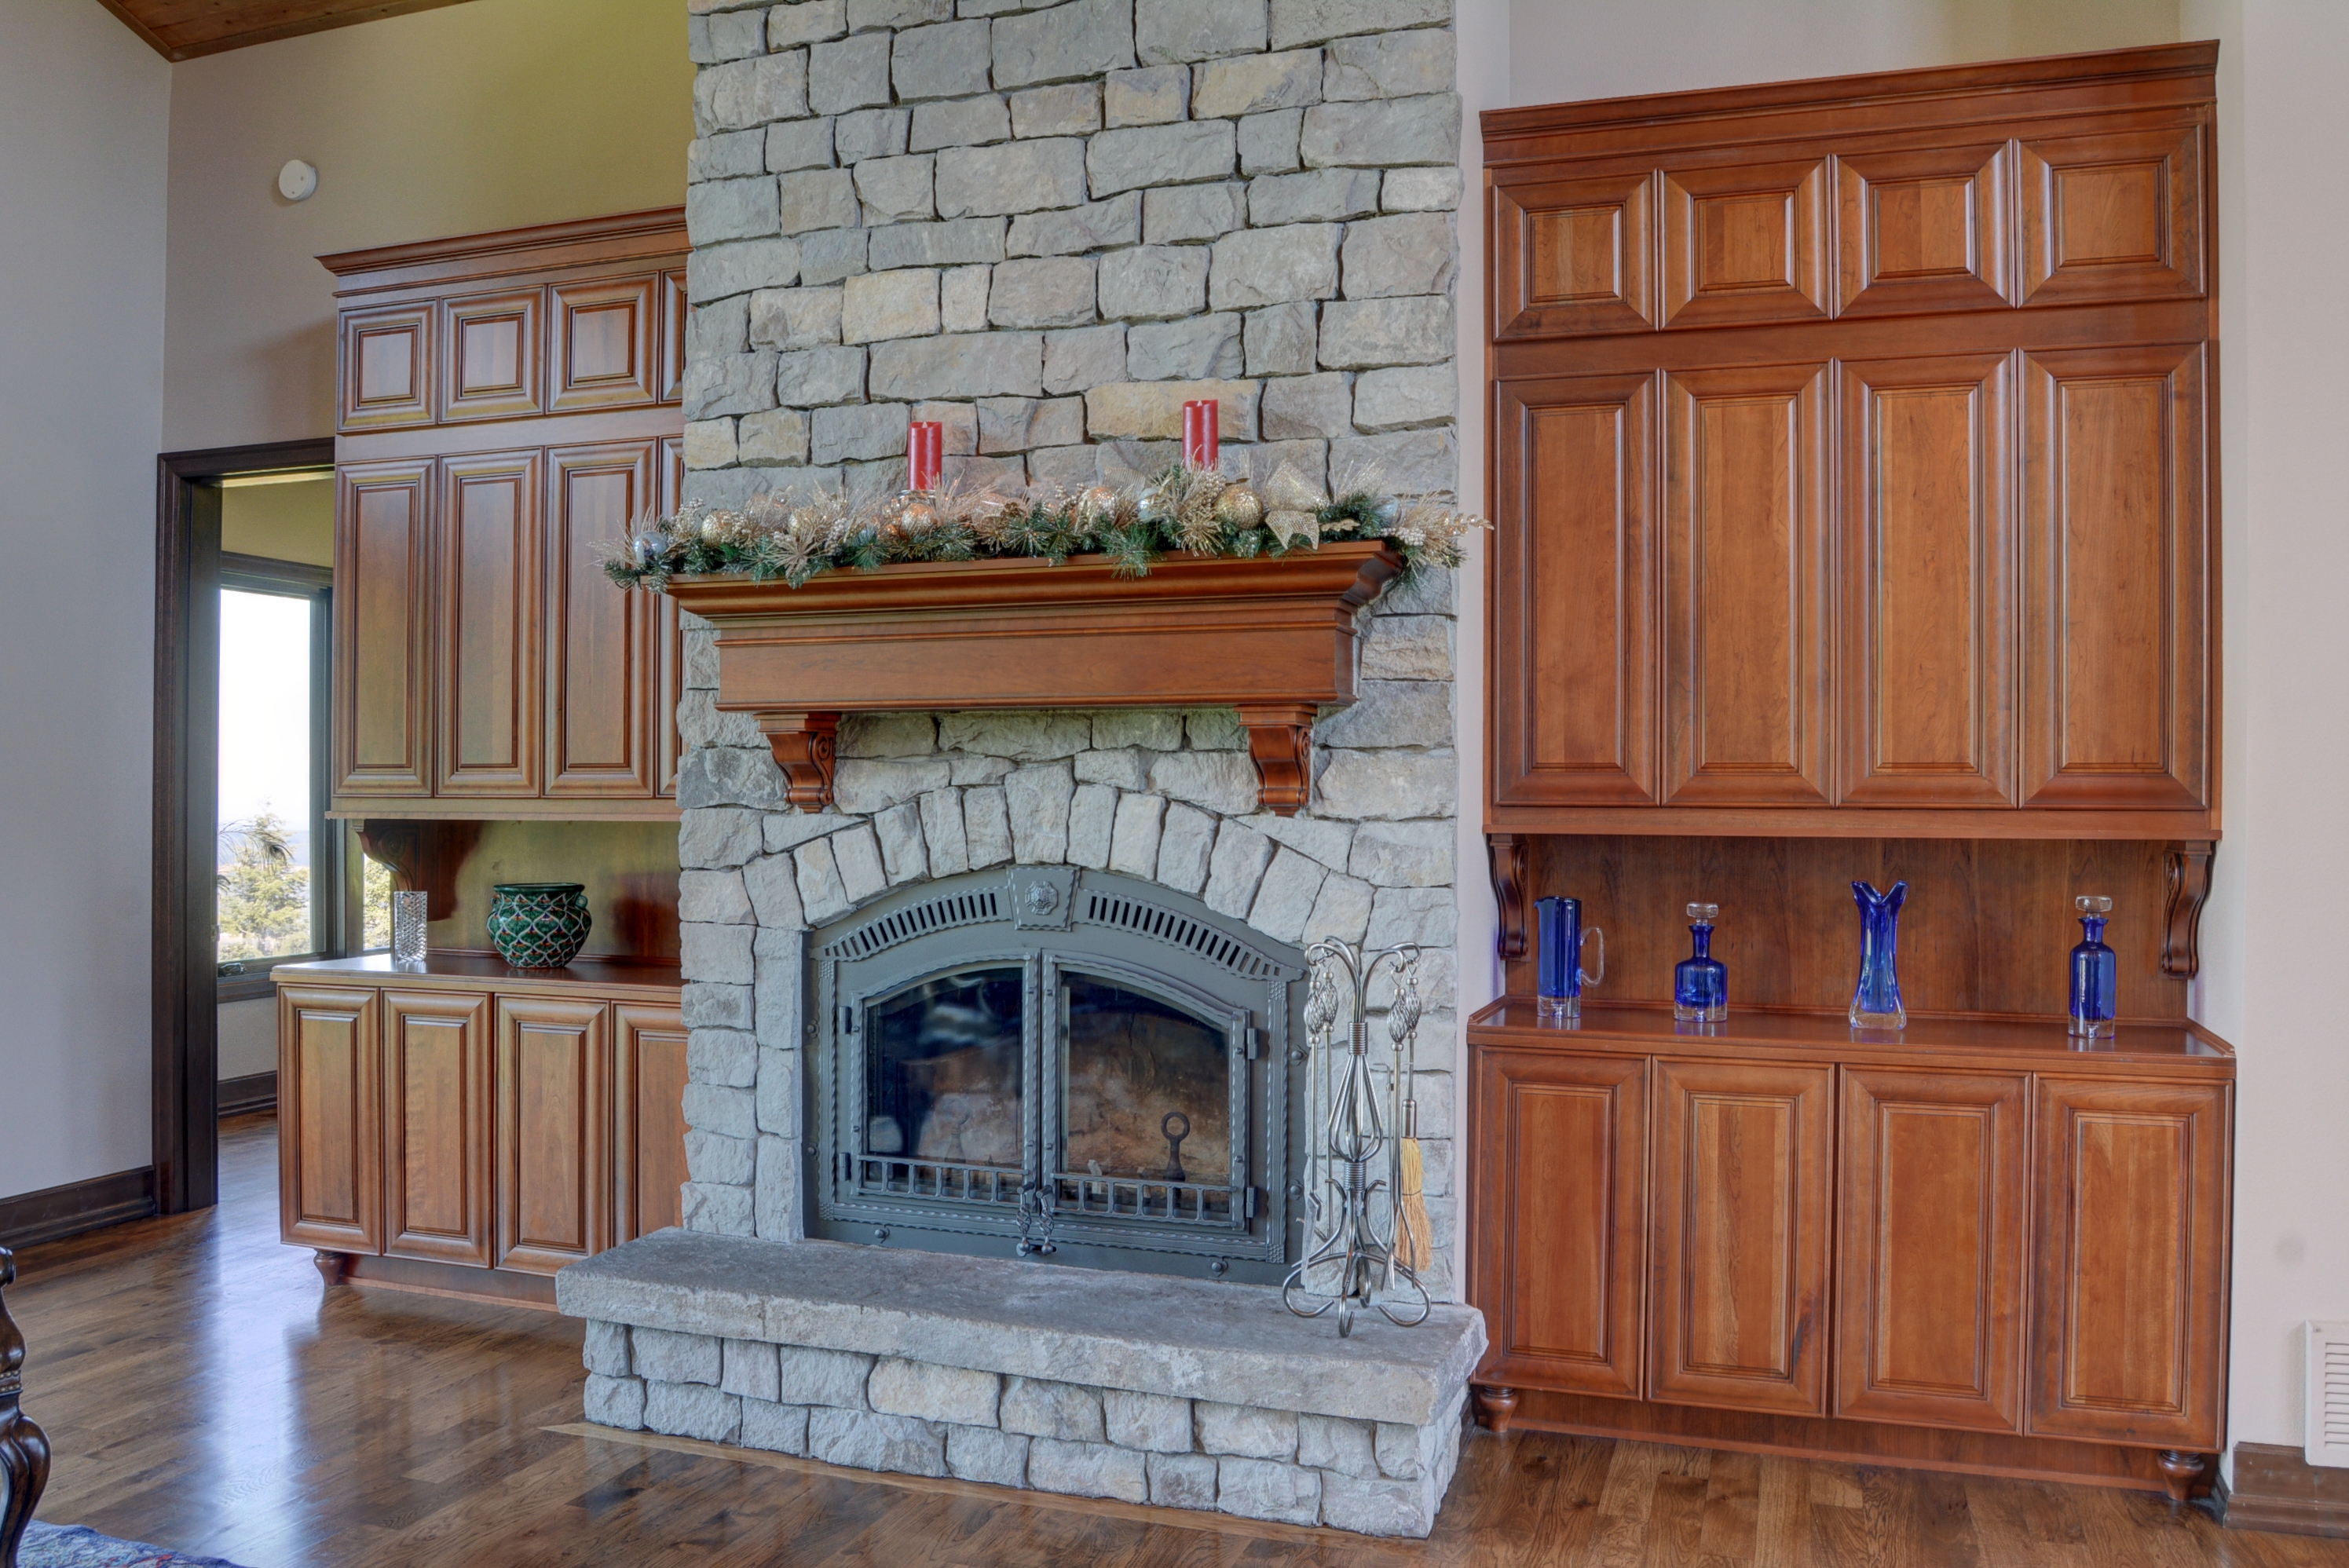 Fireplace in family froom